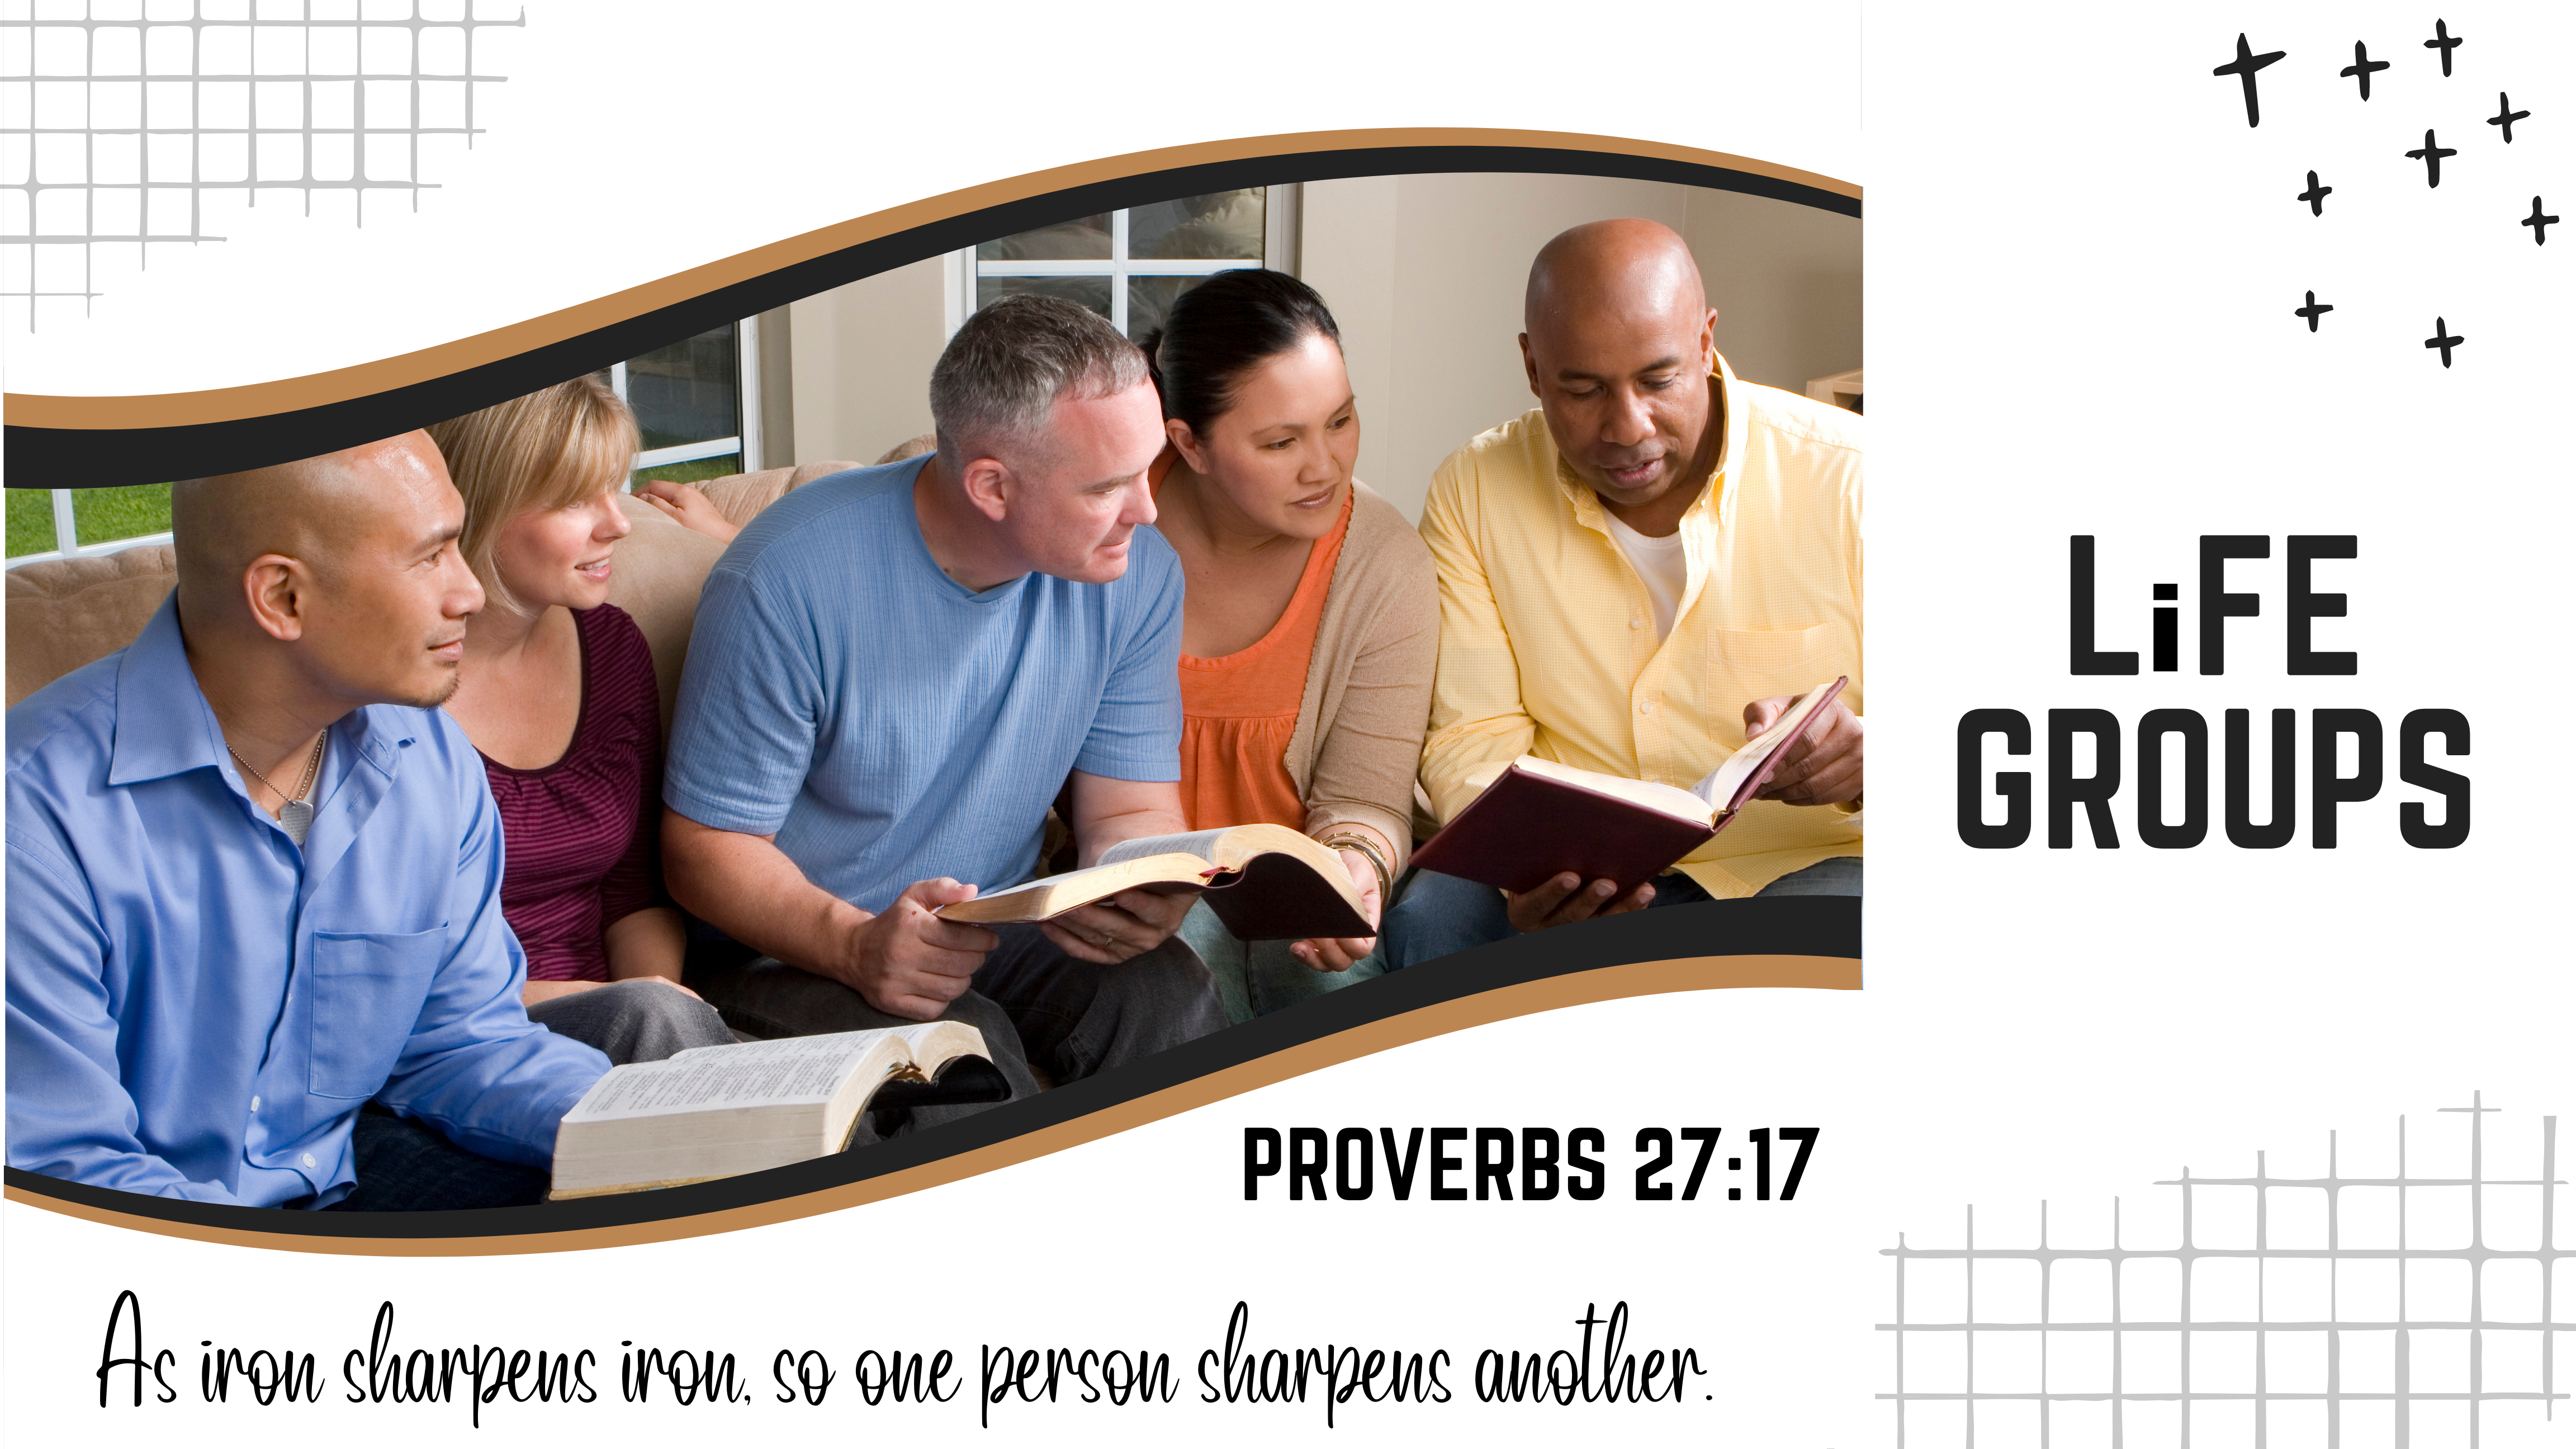 Small group of people studying Bible together